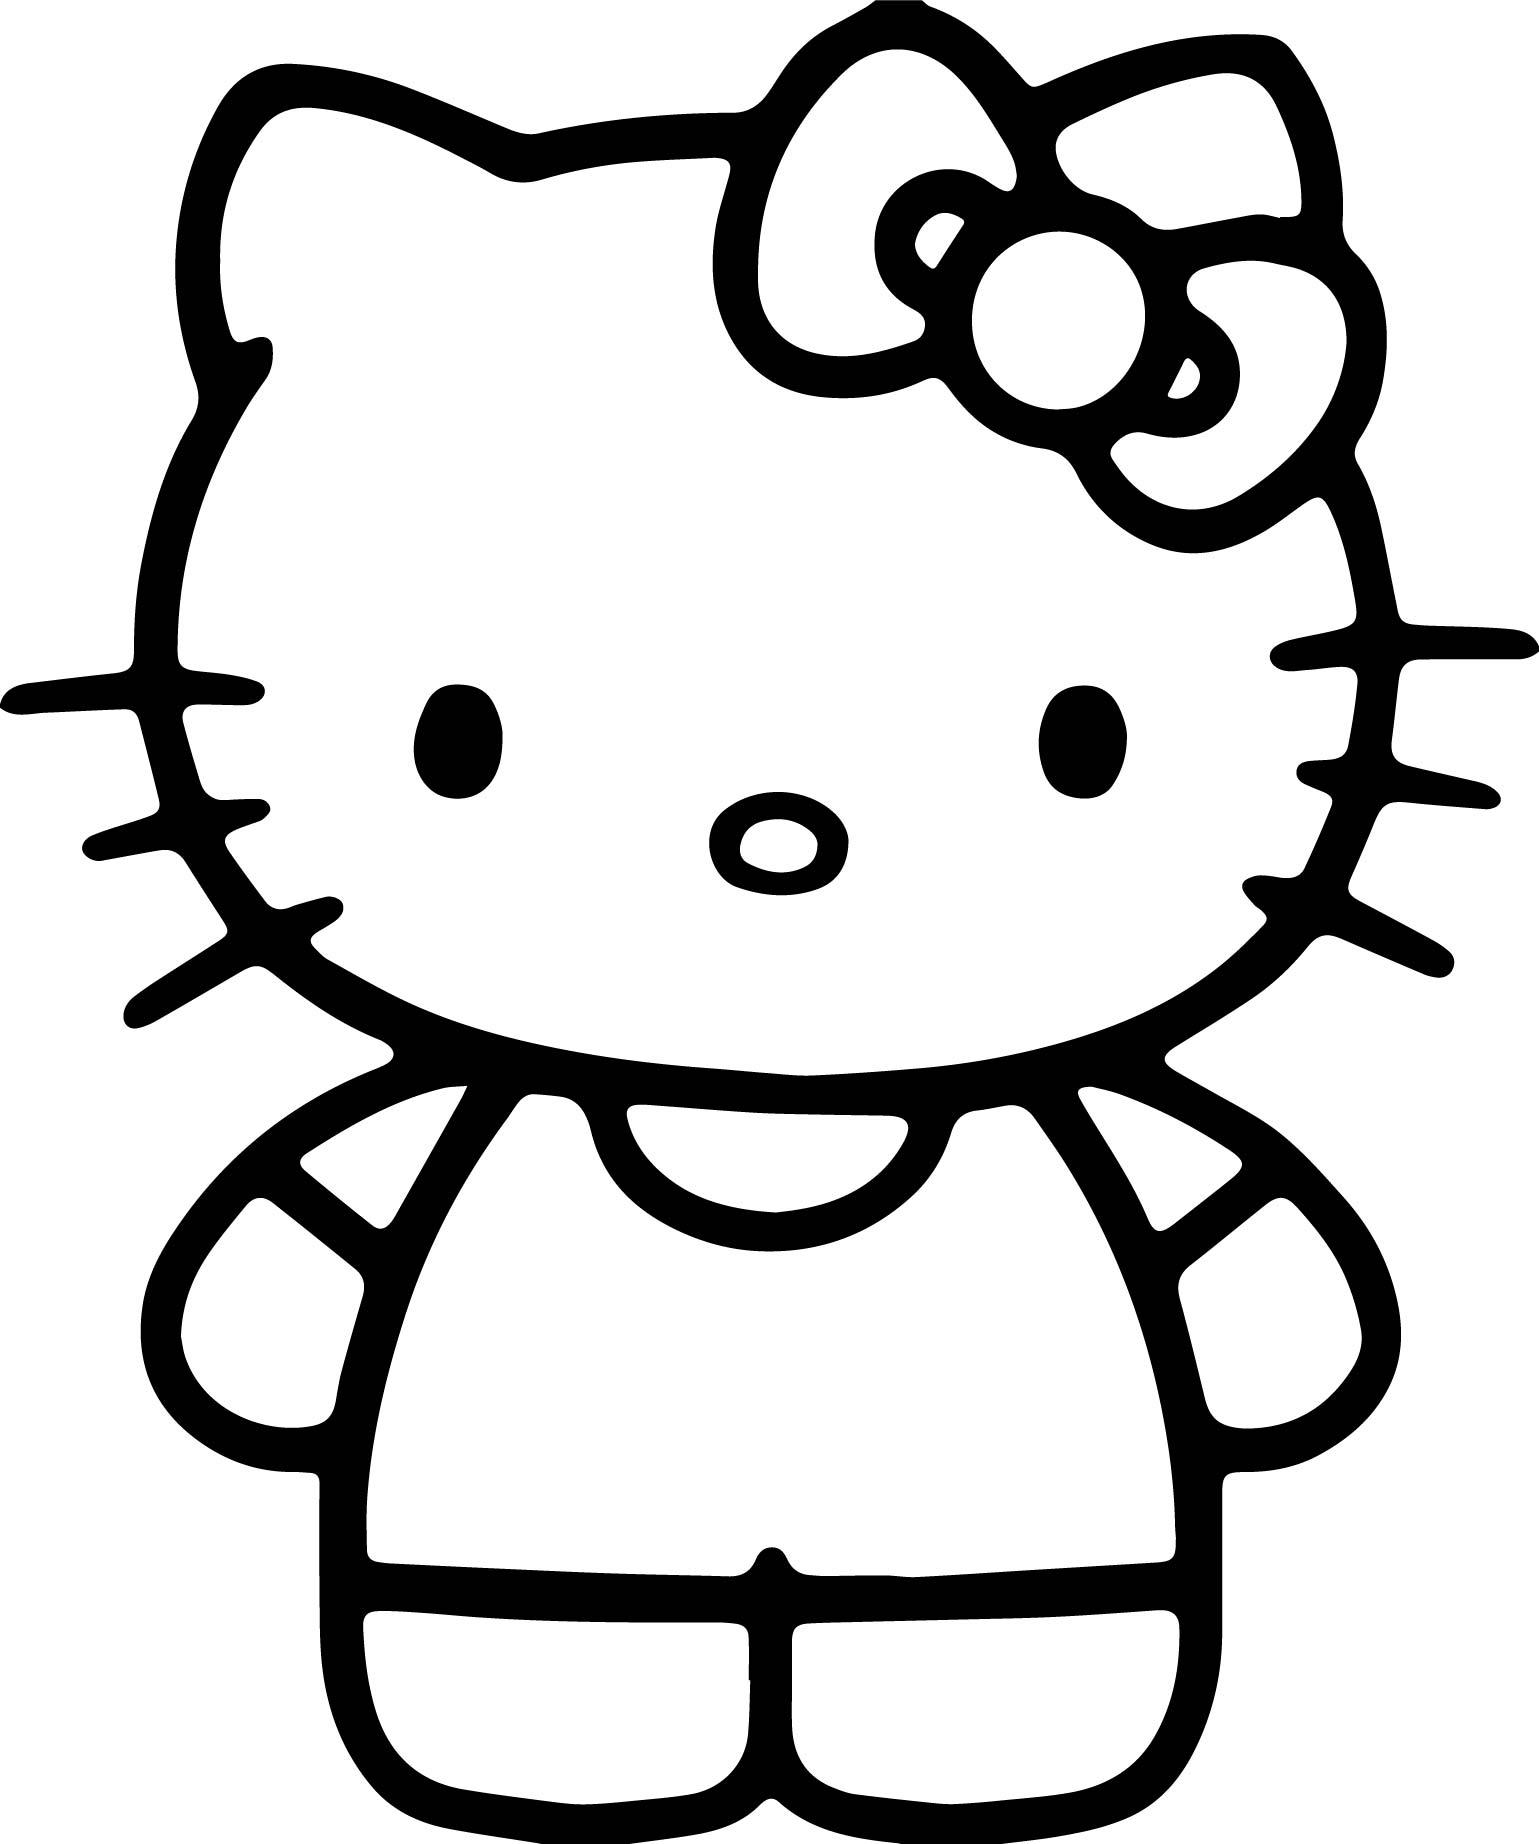 free coloring sheets for 3 year olds coloring pages for 3 year olds free download best for free sheets year 3 coloring olds 